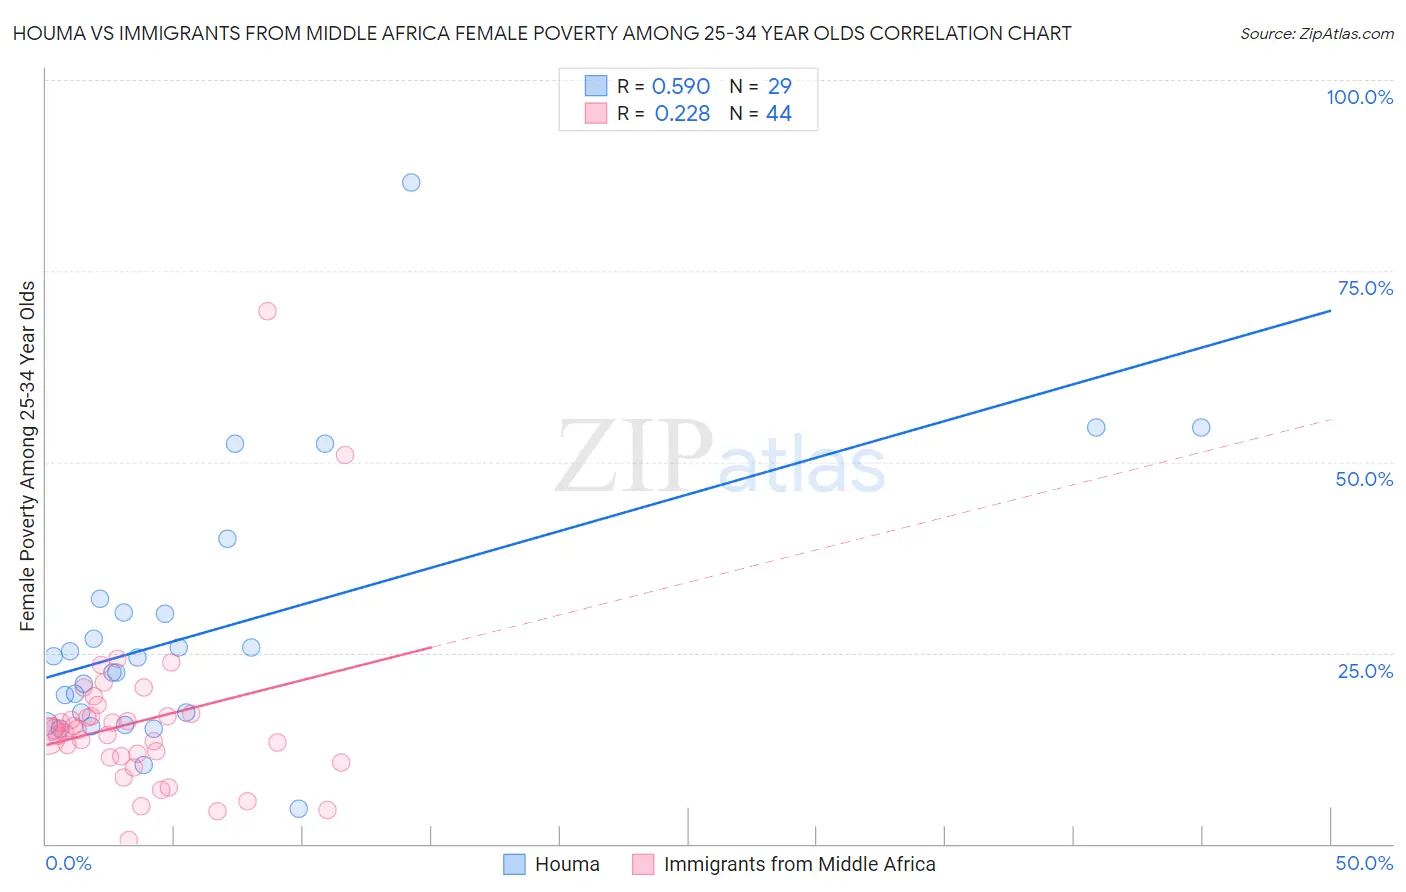 Houma vs Immigrants from Middle Africa Female Poverty Among 25-34 Year Olds